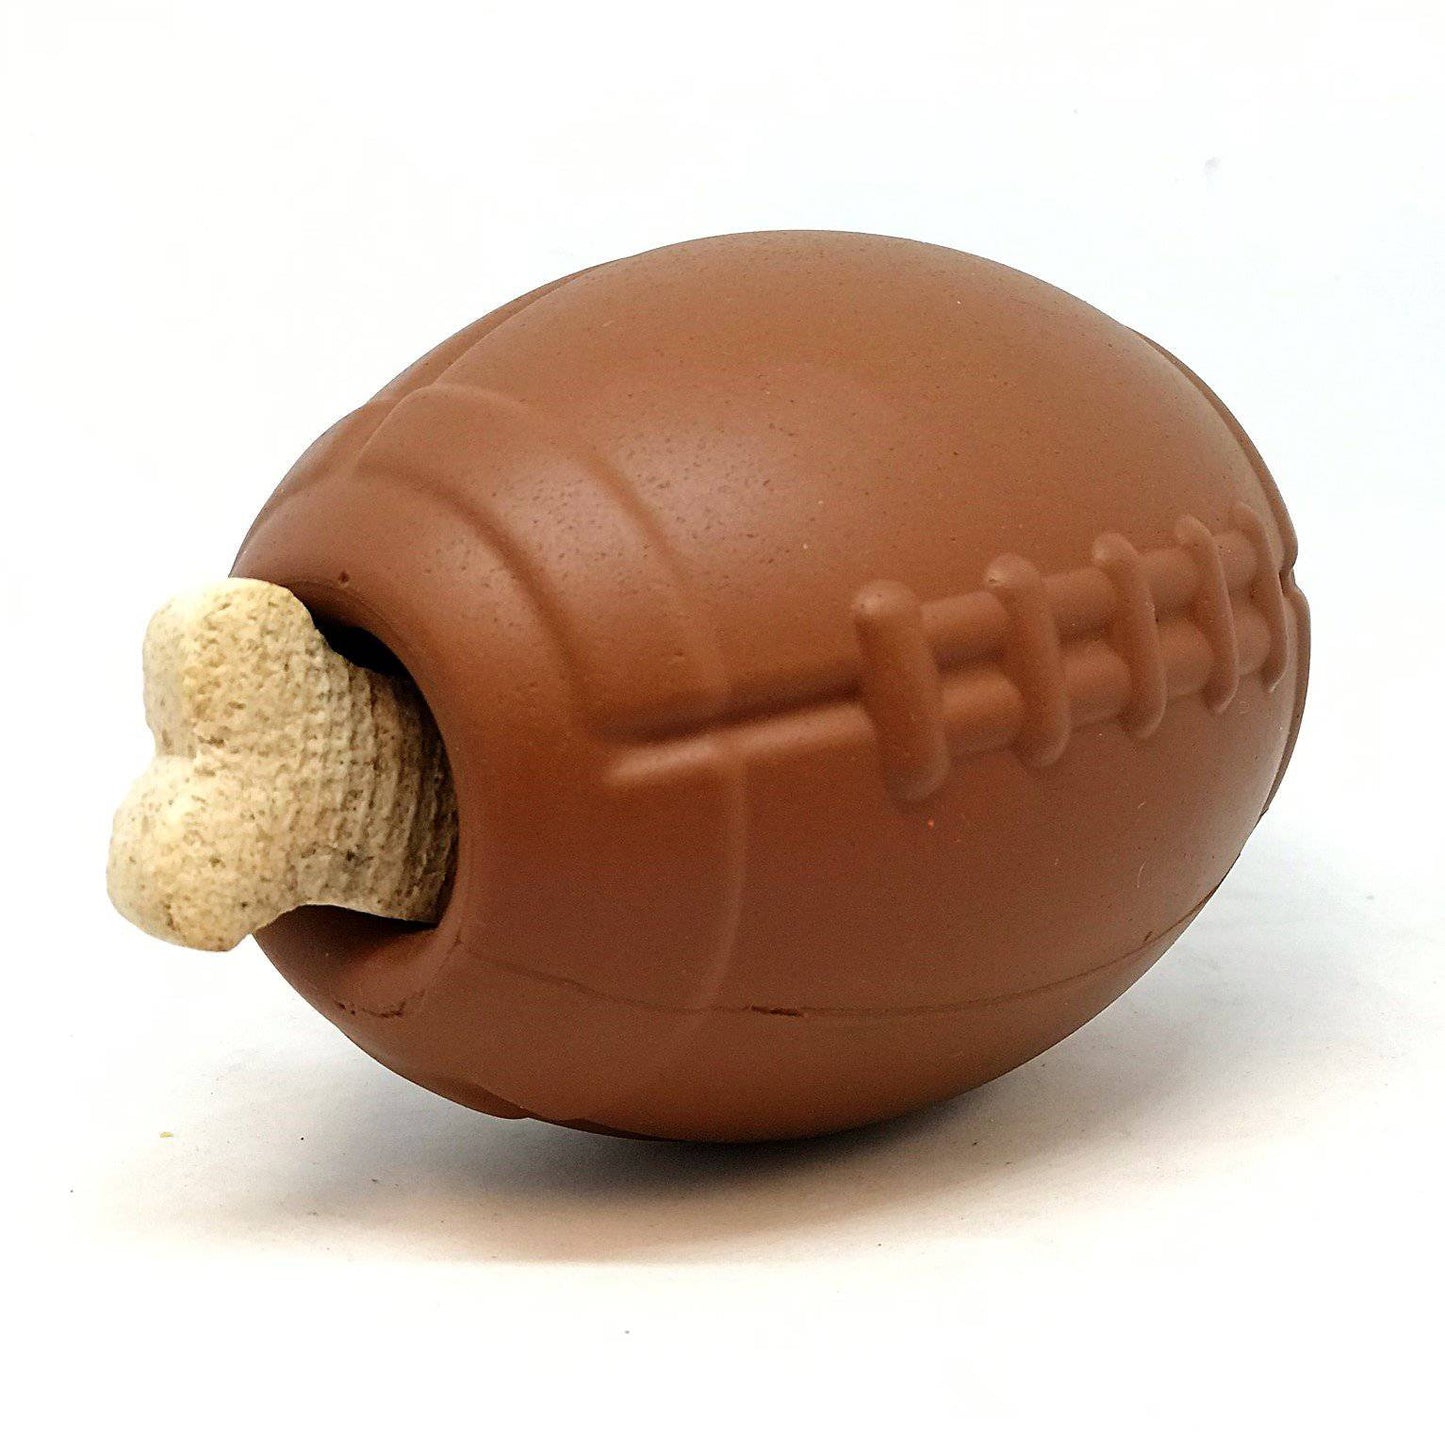 Durable Rubber Football Chew Toy and Treat Dispenser